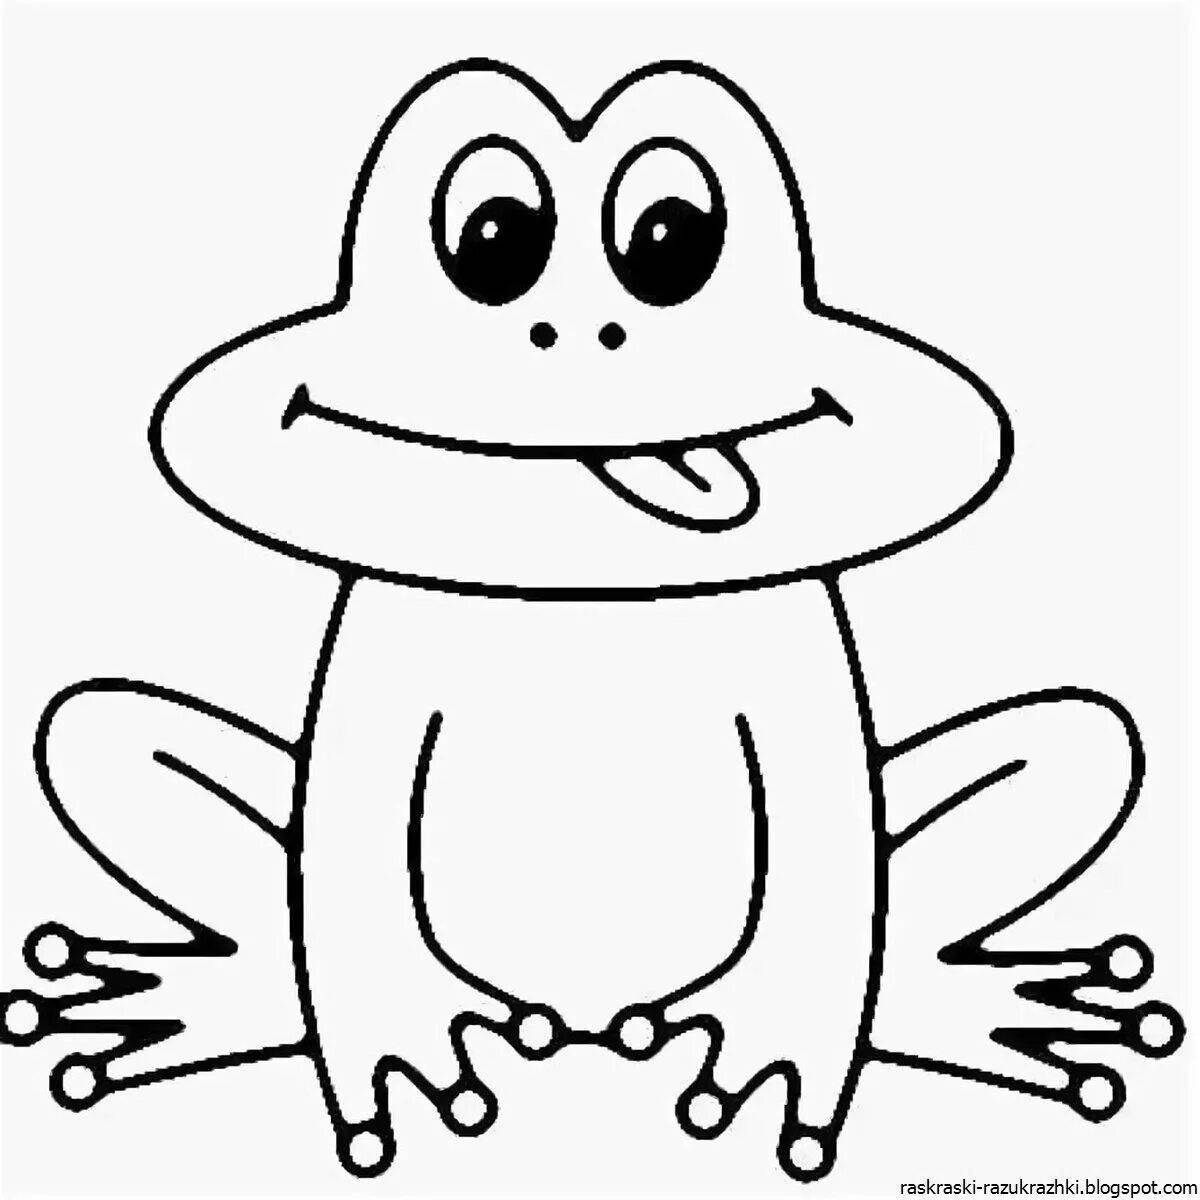 Coloring pages with live frogs for children 3-4 years old